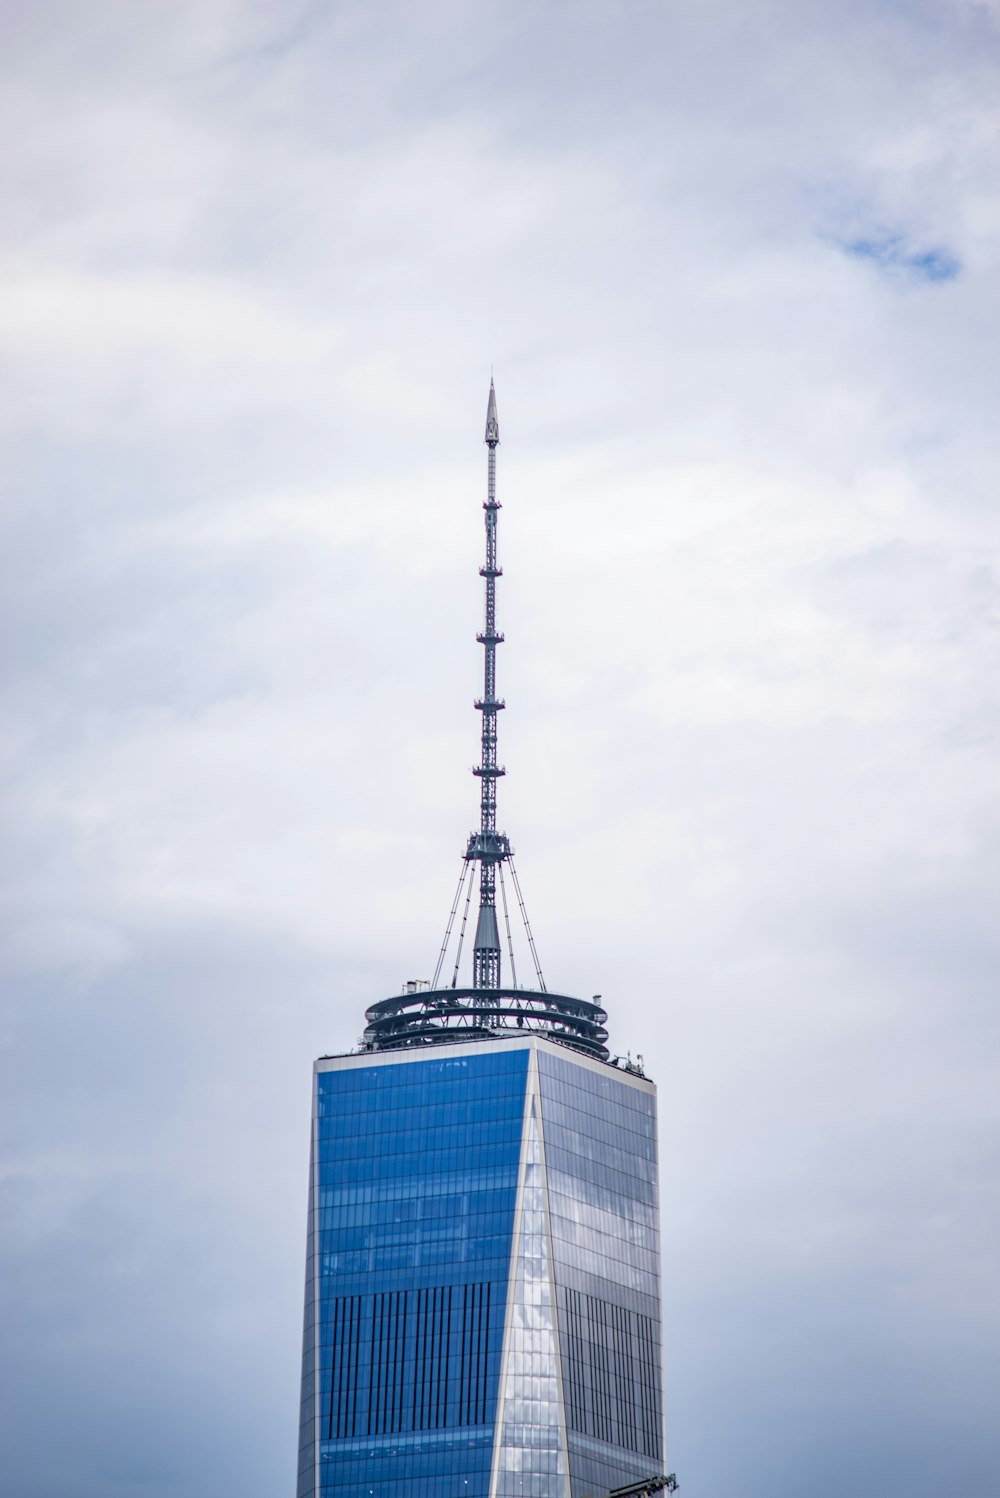 grey communication tower on top of blue and grey building